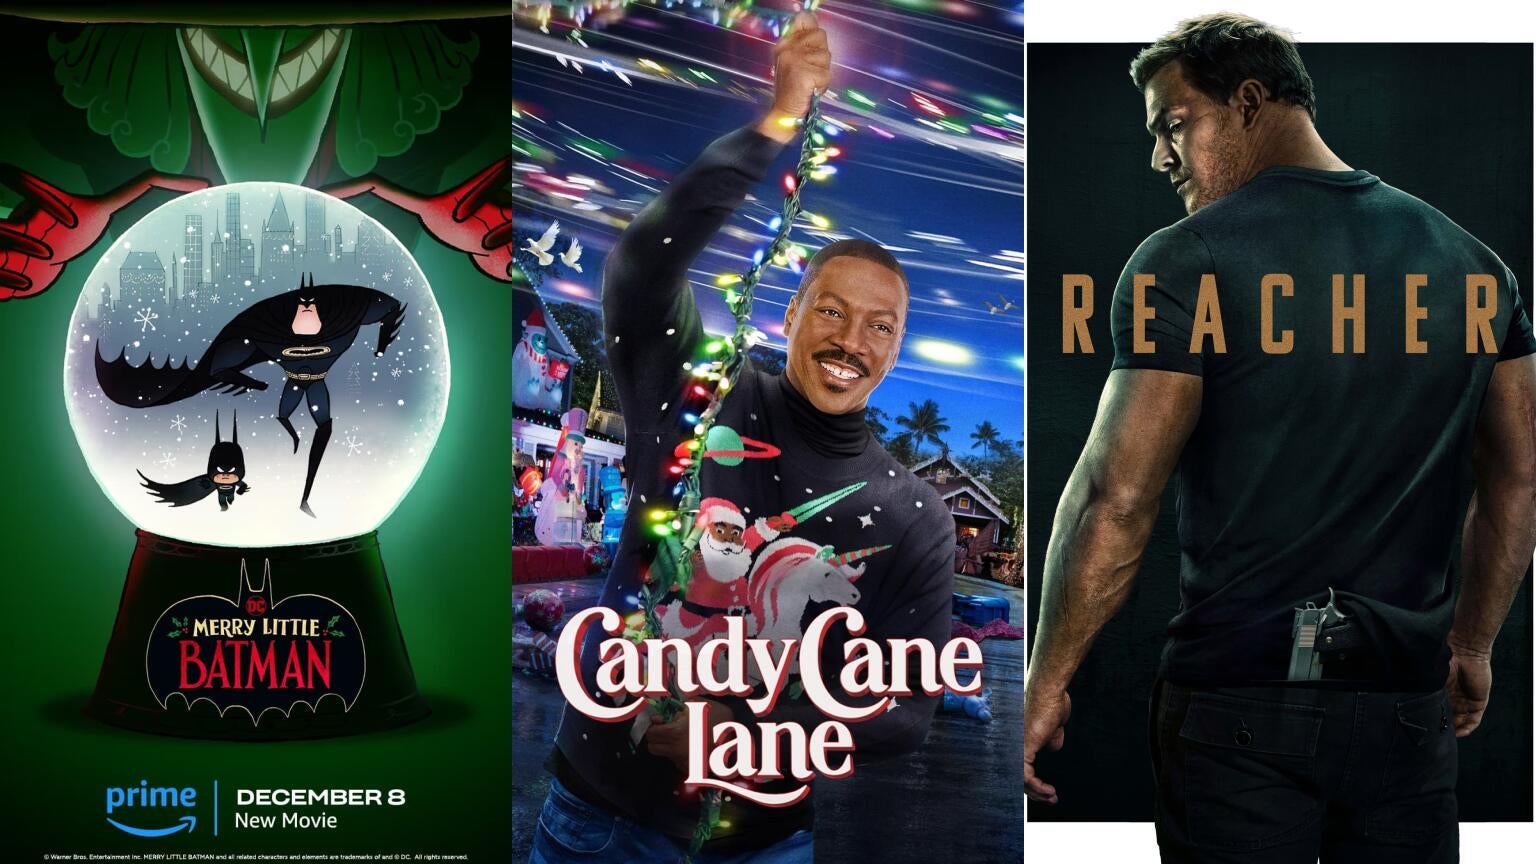 Posters for "Merry Little Batman," "Candy Cane Lane," and "Reacher" on Prime Video